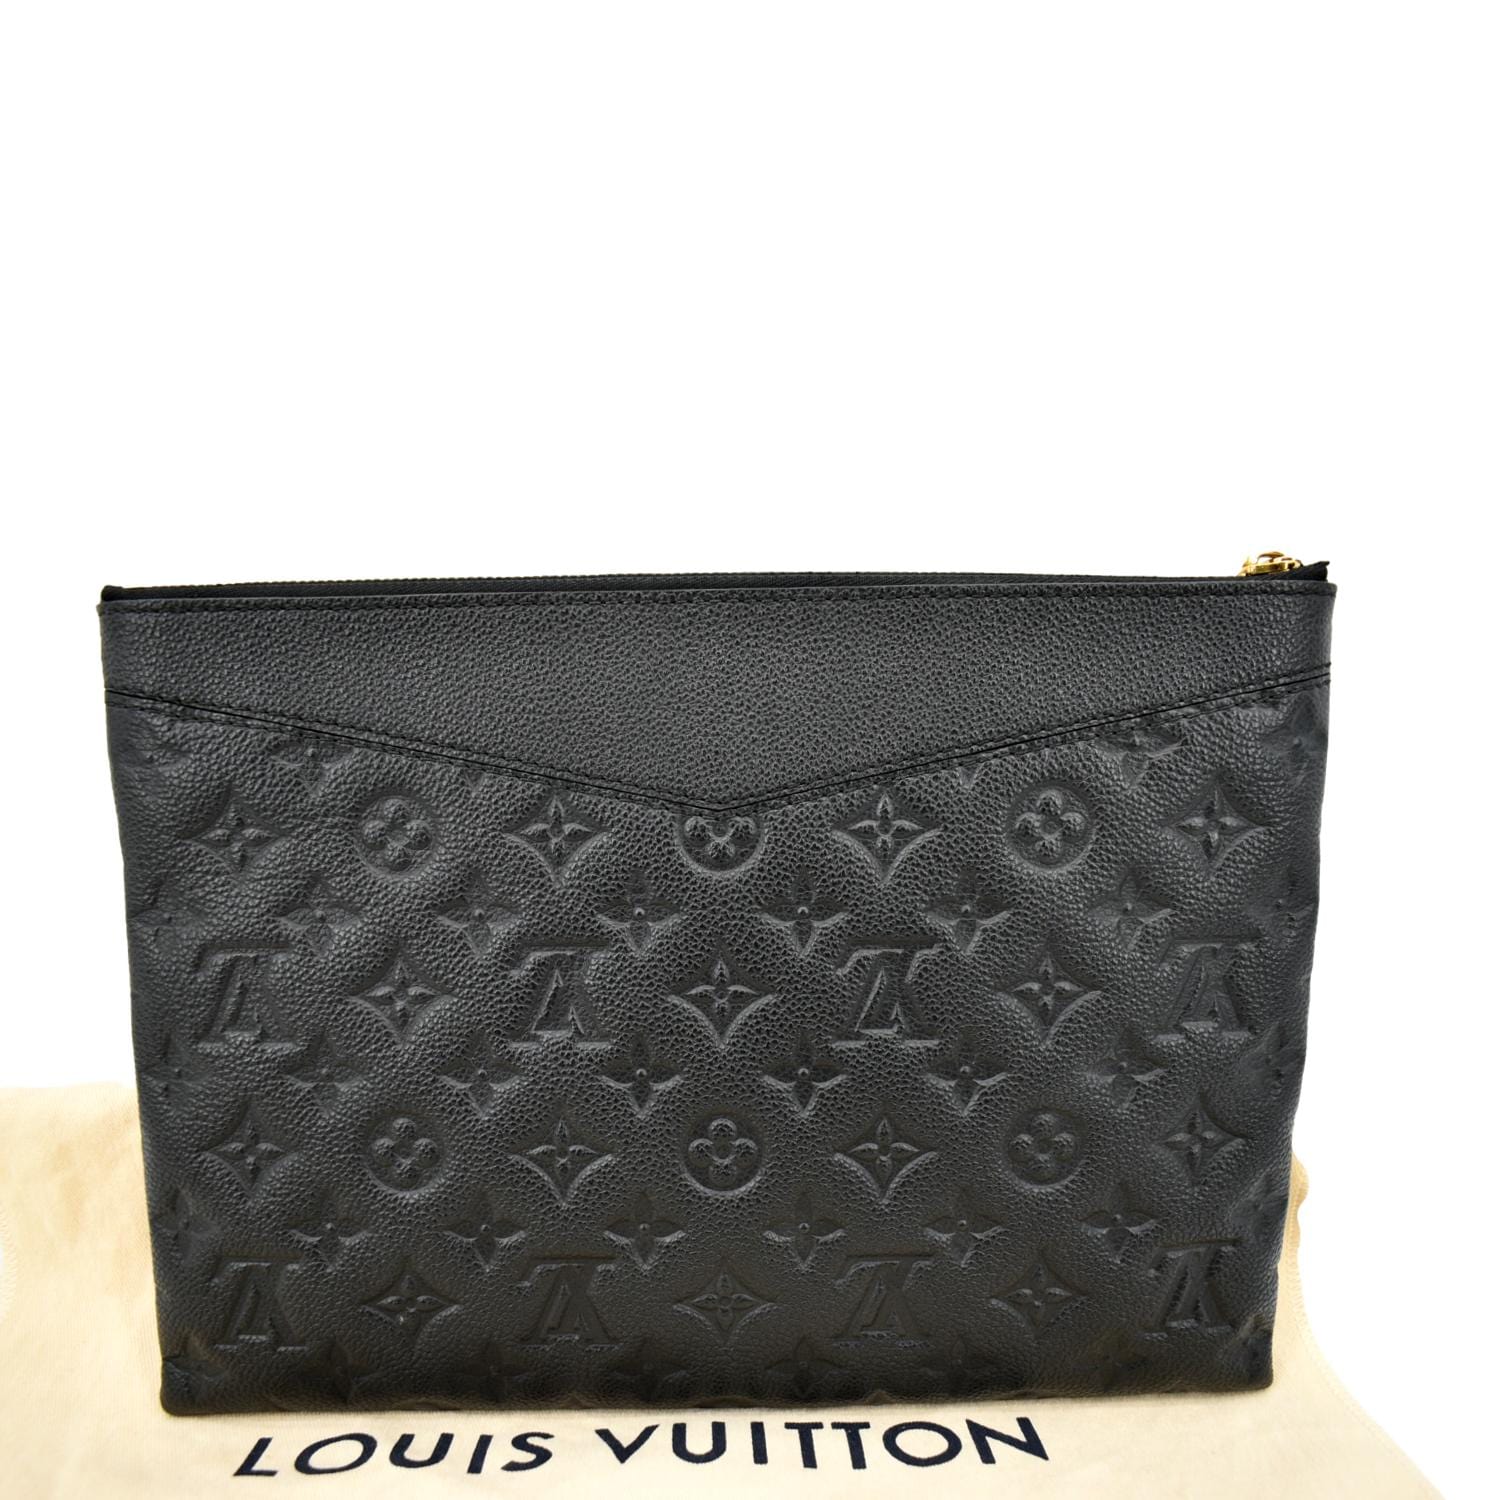 Louis Vuitton Pre-owned Women's Clutch Bag - White - One Size